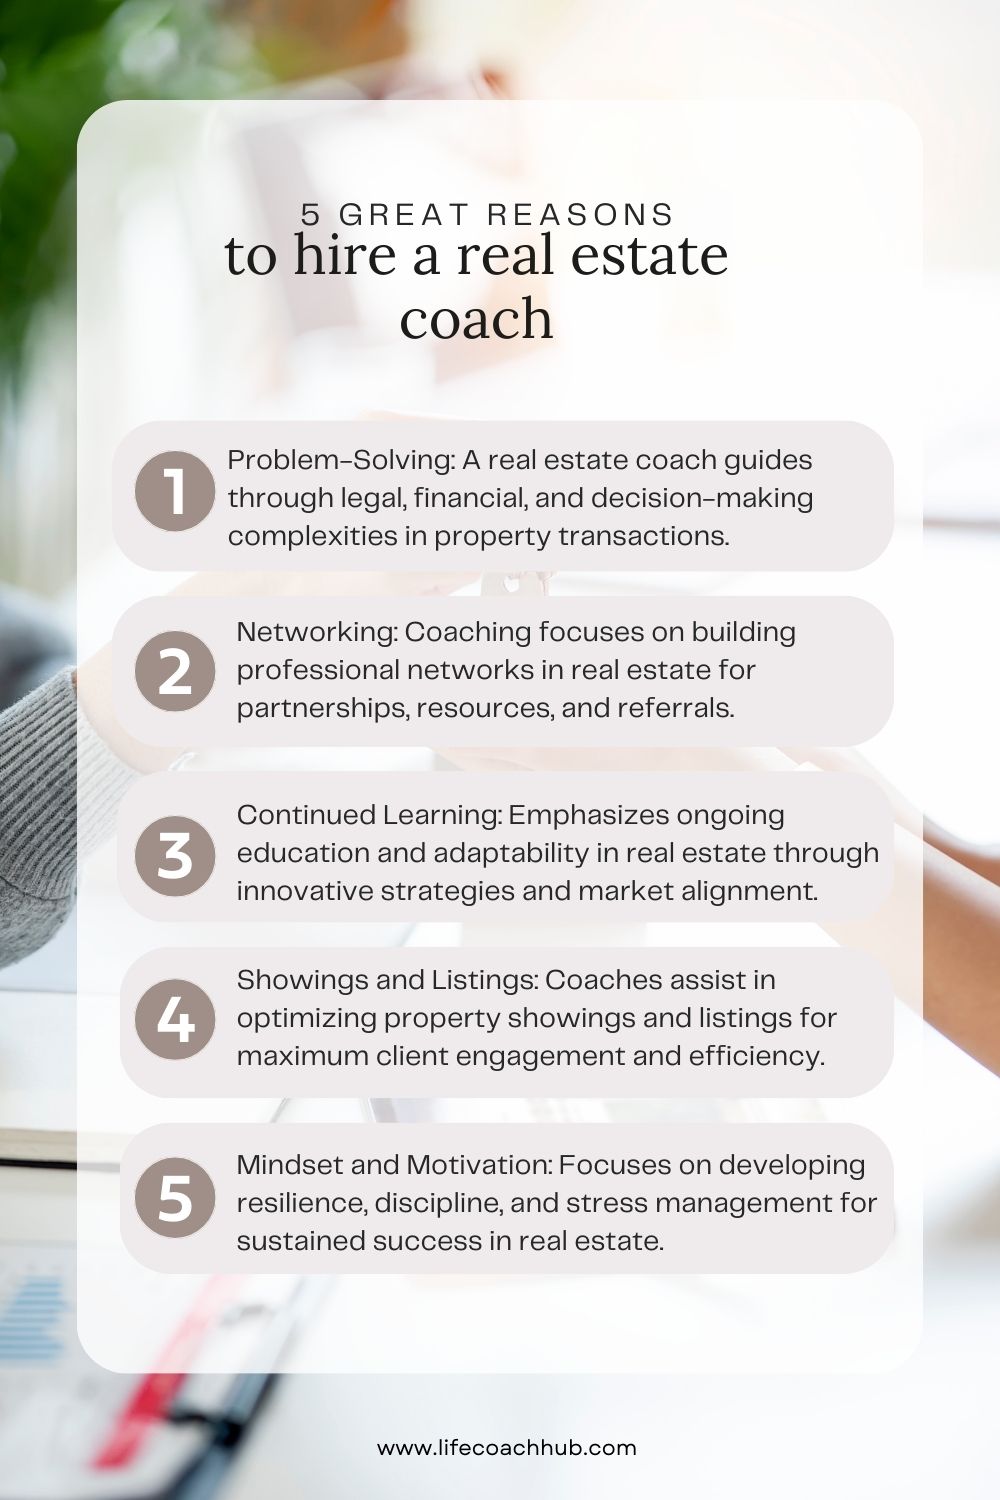 why hire a real estate coach?